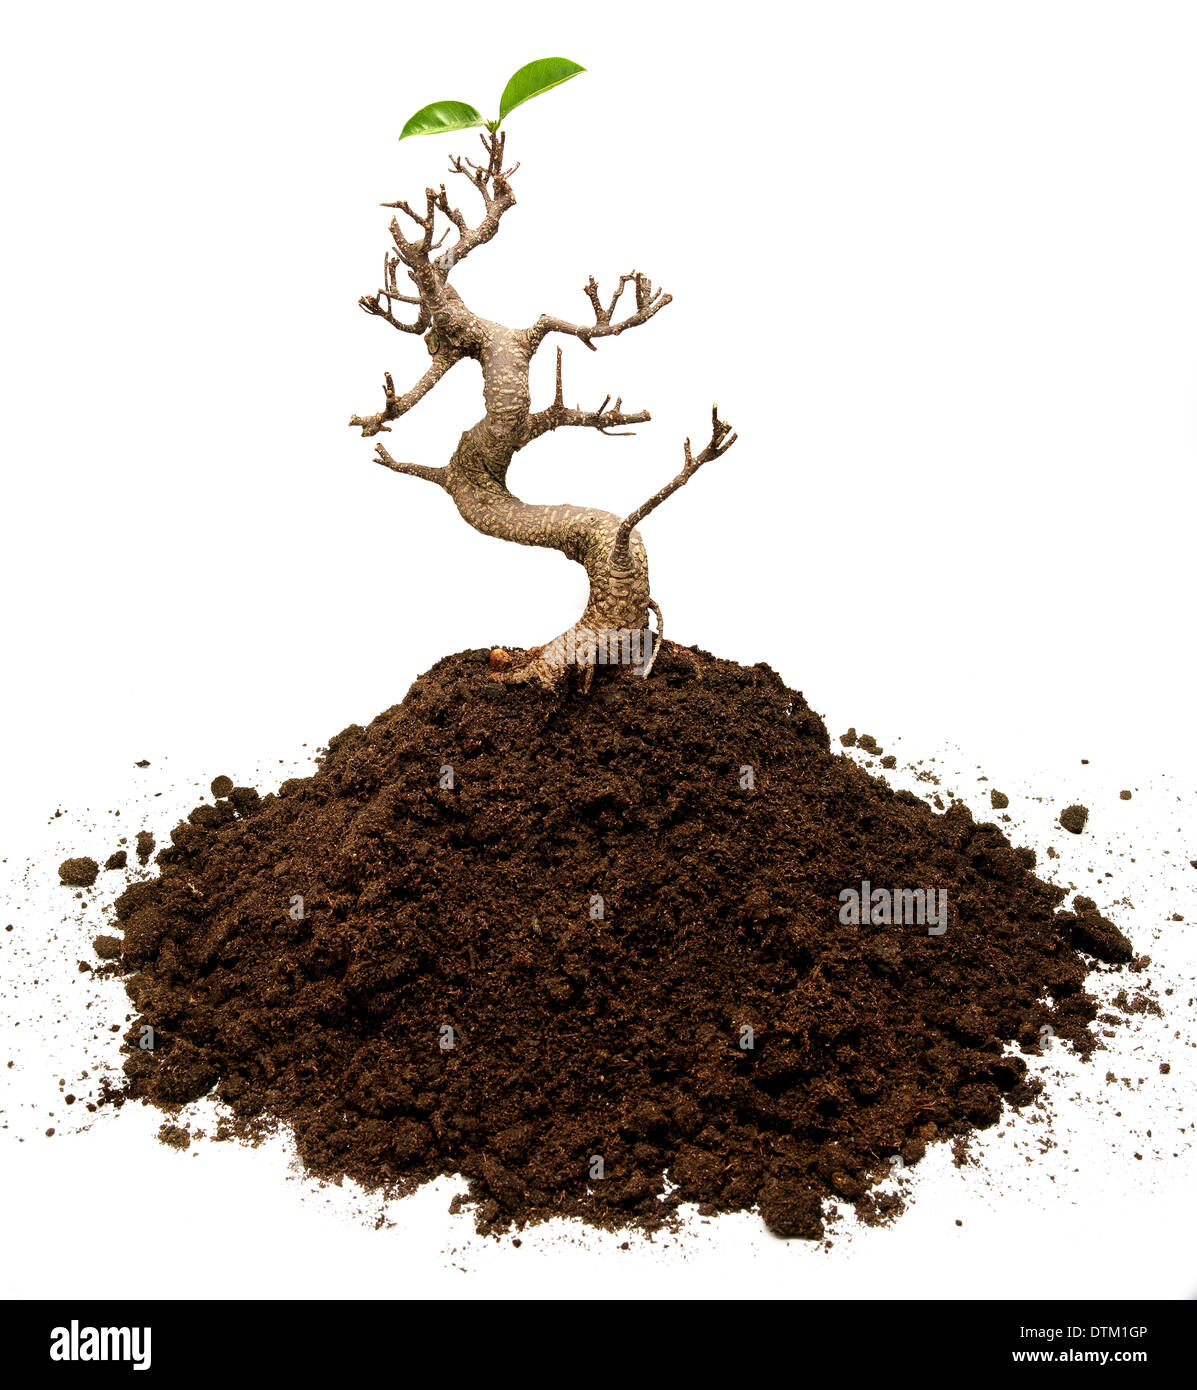 Bonsai tree on a ground with two leaves Stock Photo